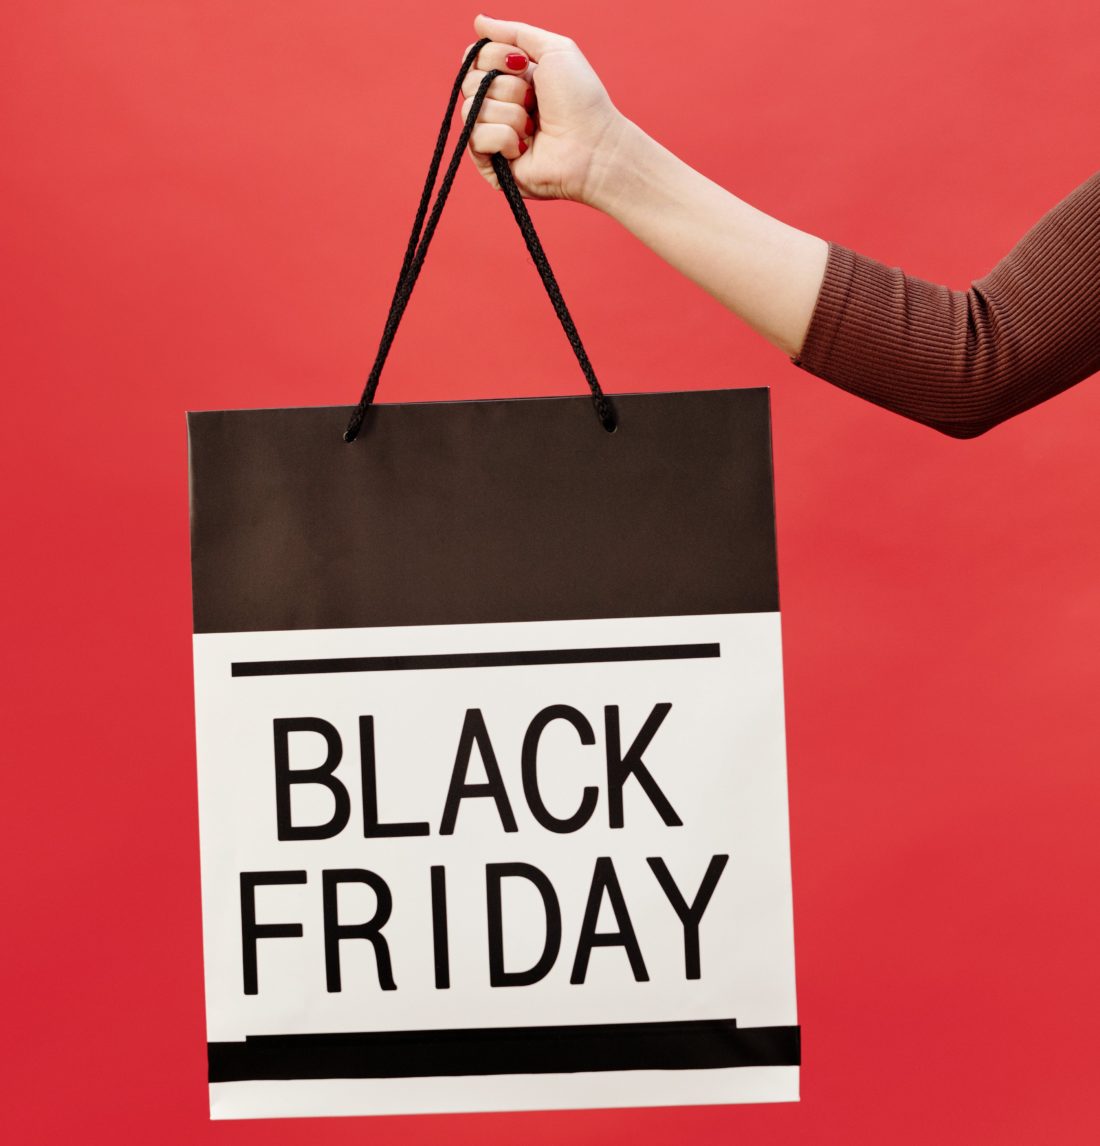 Bag-with-Black-Friday-text-being-held-in-the-air